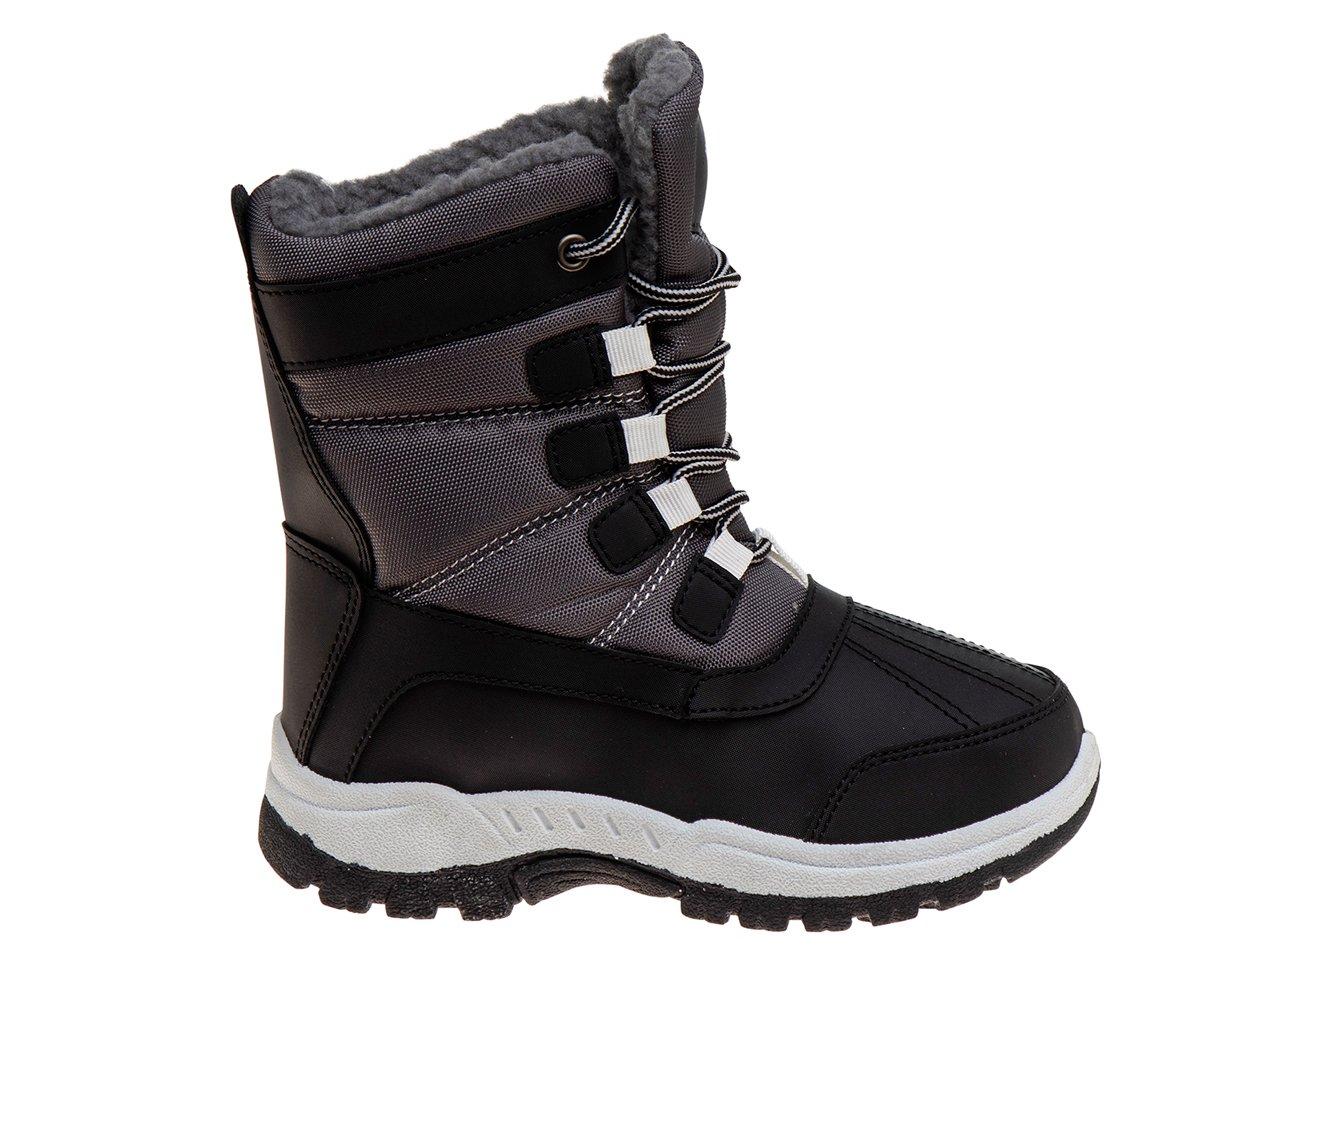 Boys' Beverly Hills Polo Club Toddler & Little Kid Mammoth Winter Boots